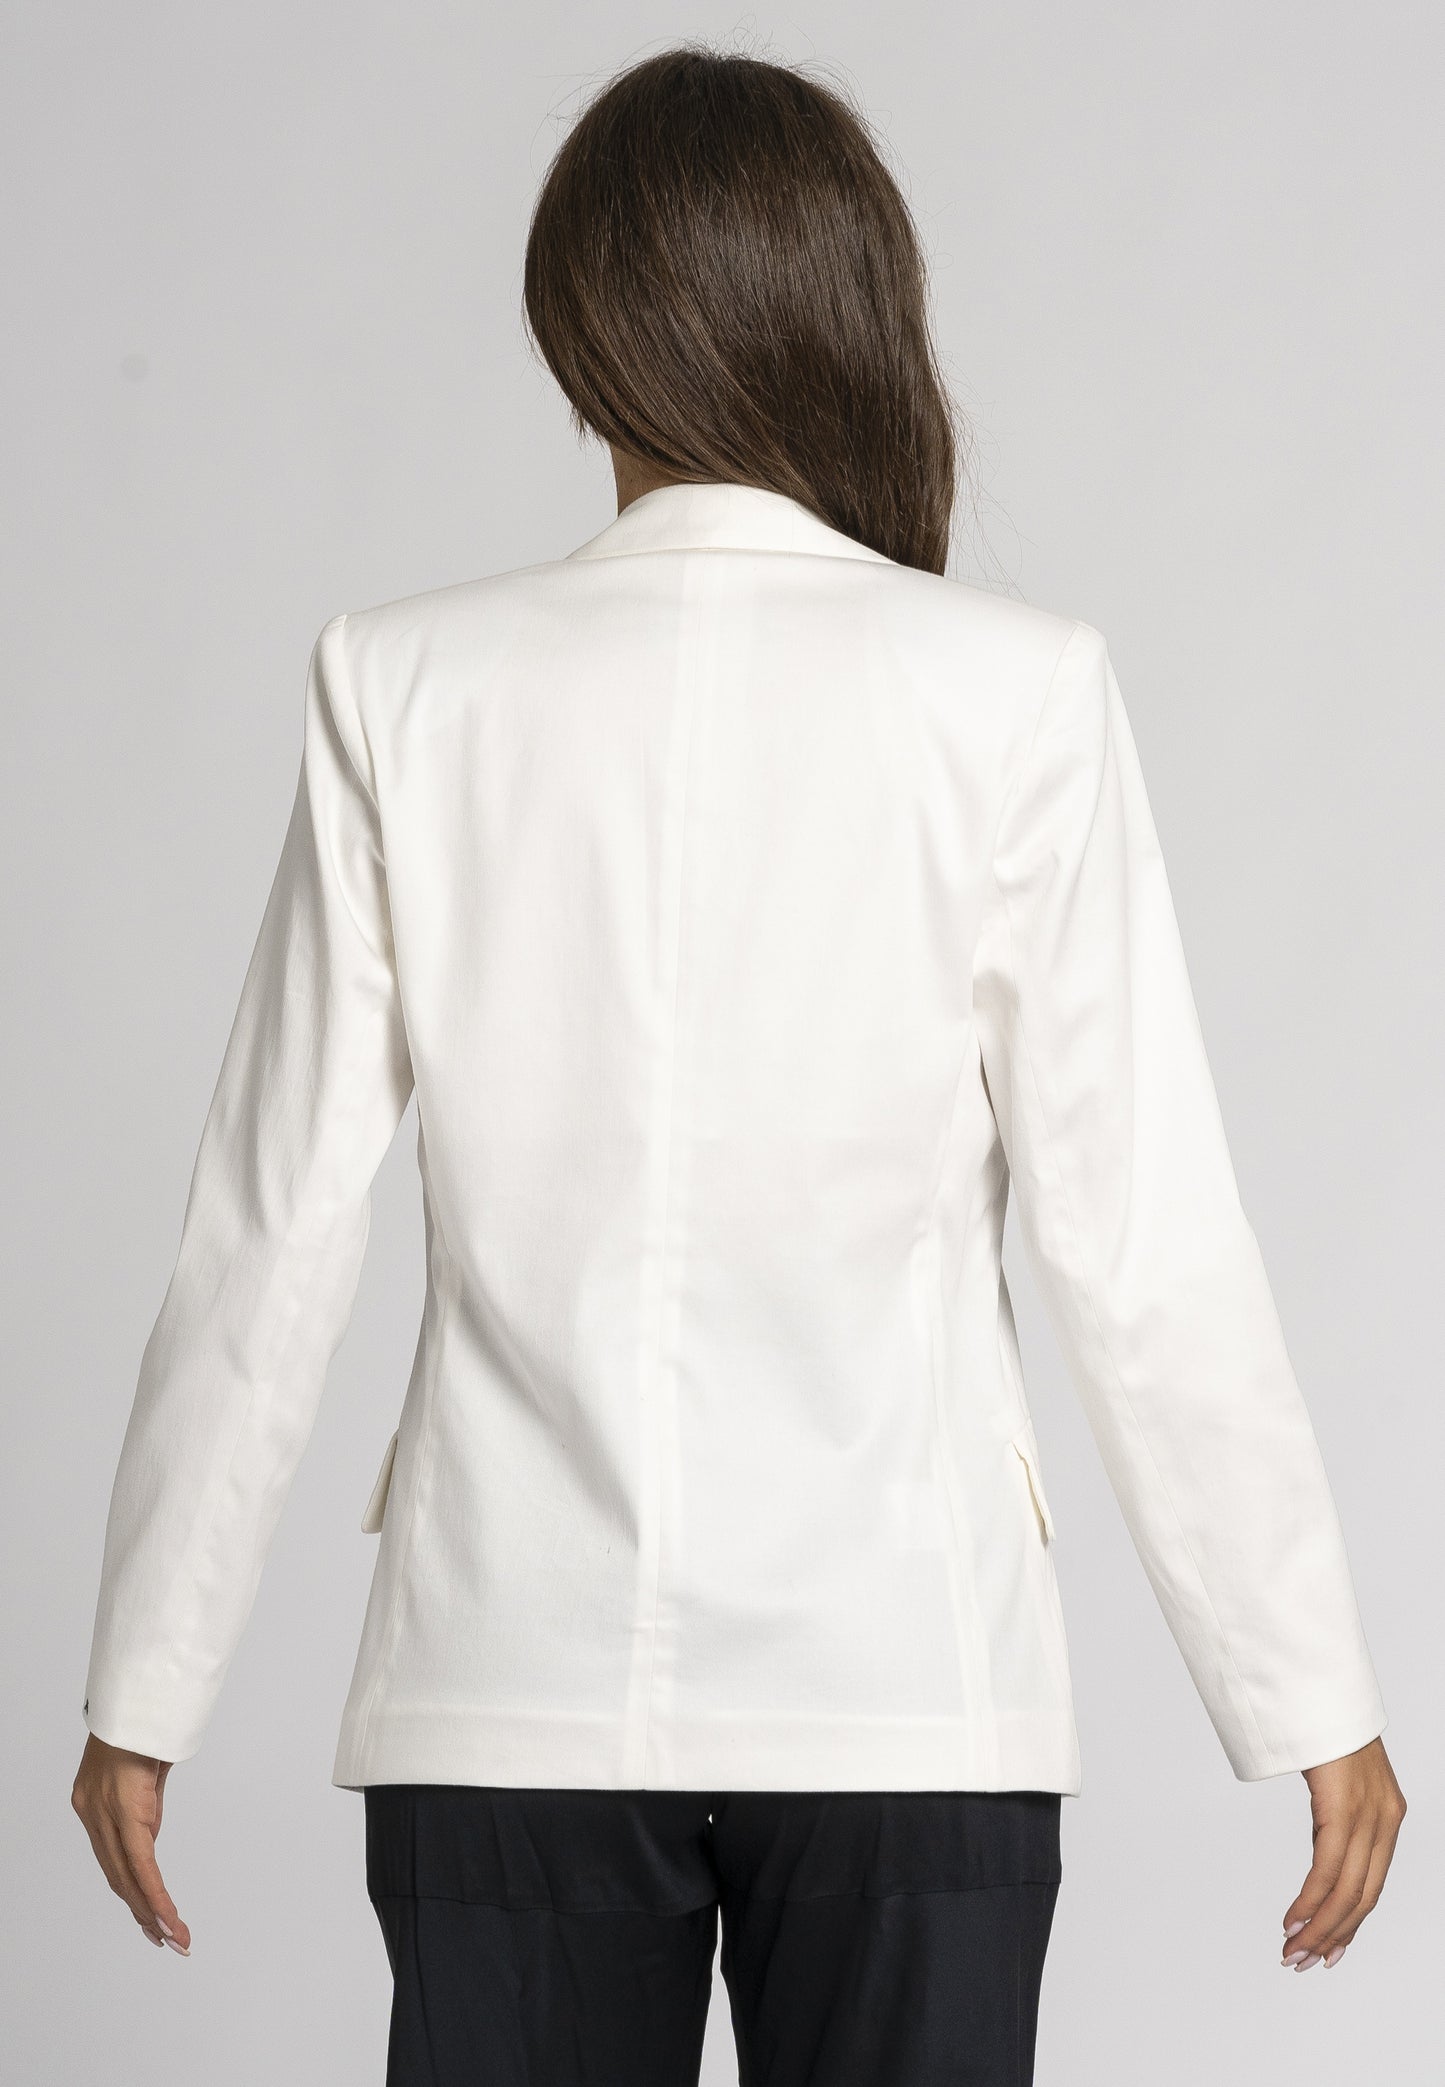 Girasole White Jacket - Soft Cotton Stretch, Classic Collar, Two-Button Lacing, Rounded Hem, Classic Shoulder